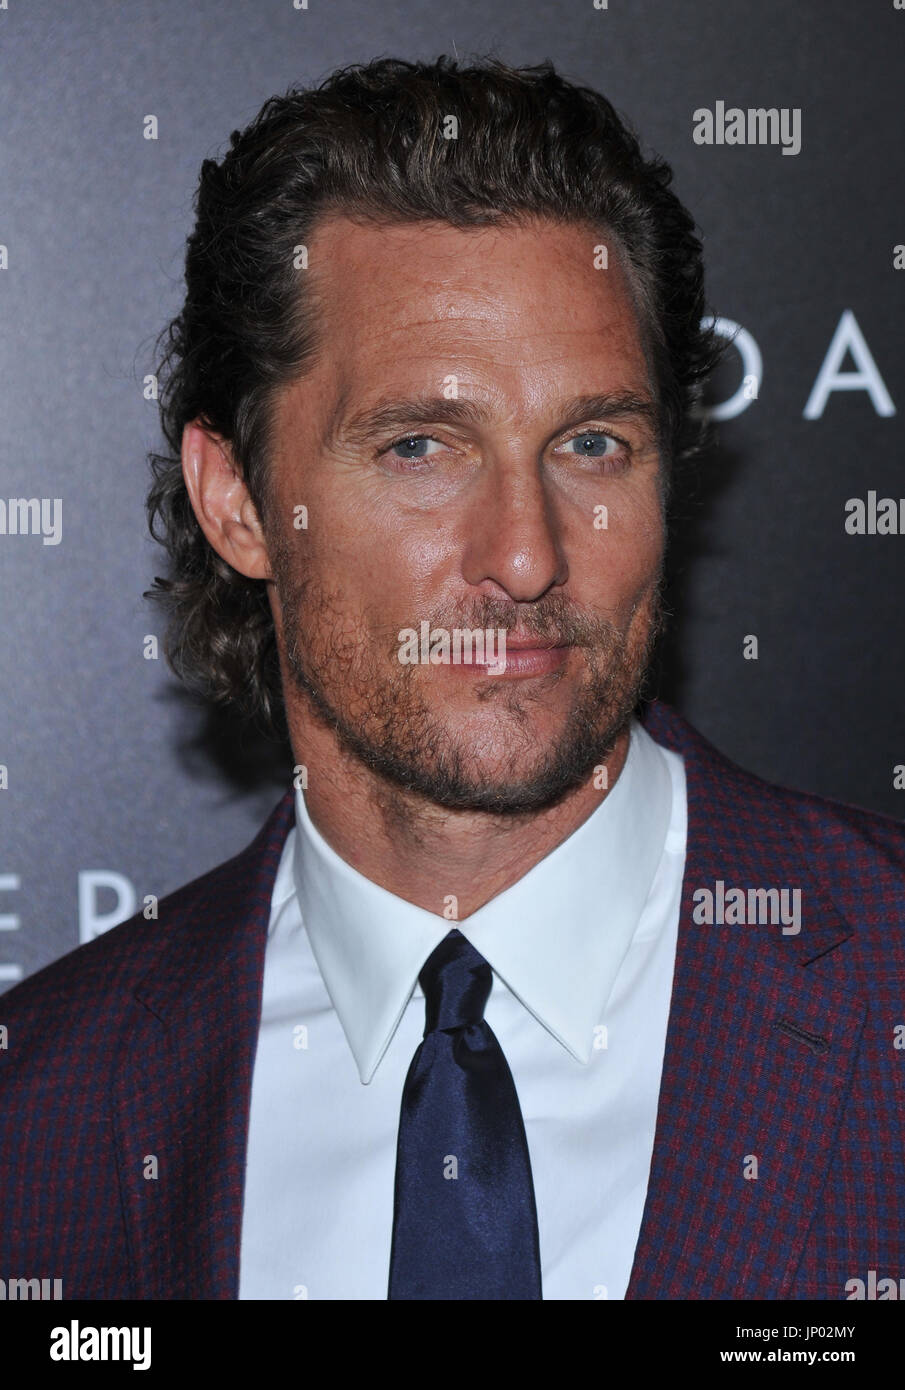 NEW YORK, NY - July 31: Matthew McConaughey attends 'The Dark Tower' New York premiere at Museum of Modern Art on July 31, 2017 in New York City. @John Palmer/Media Punch Stock Photo